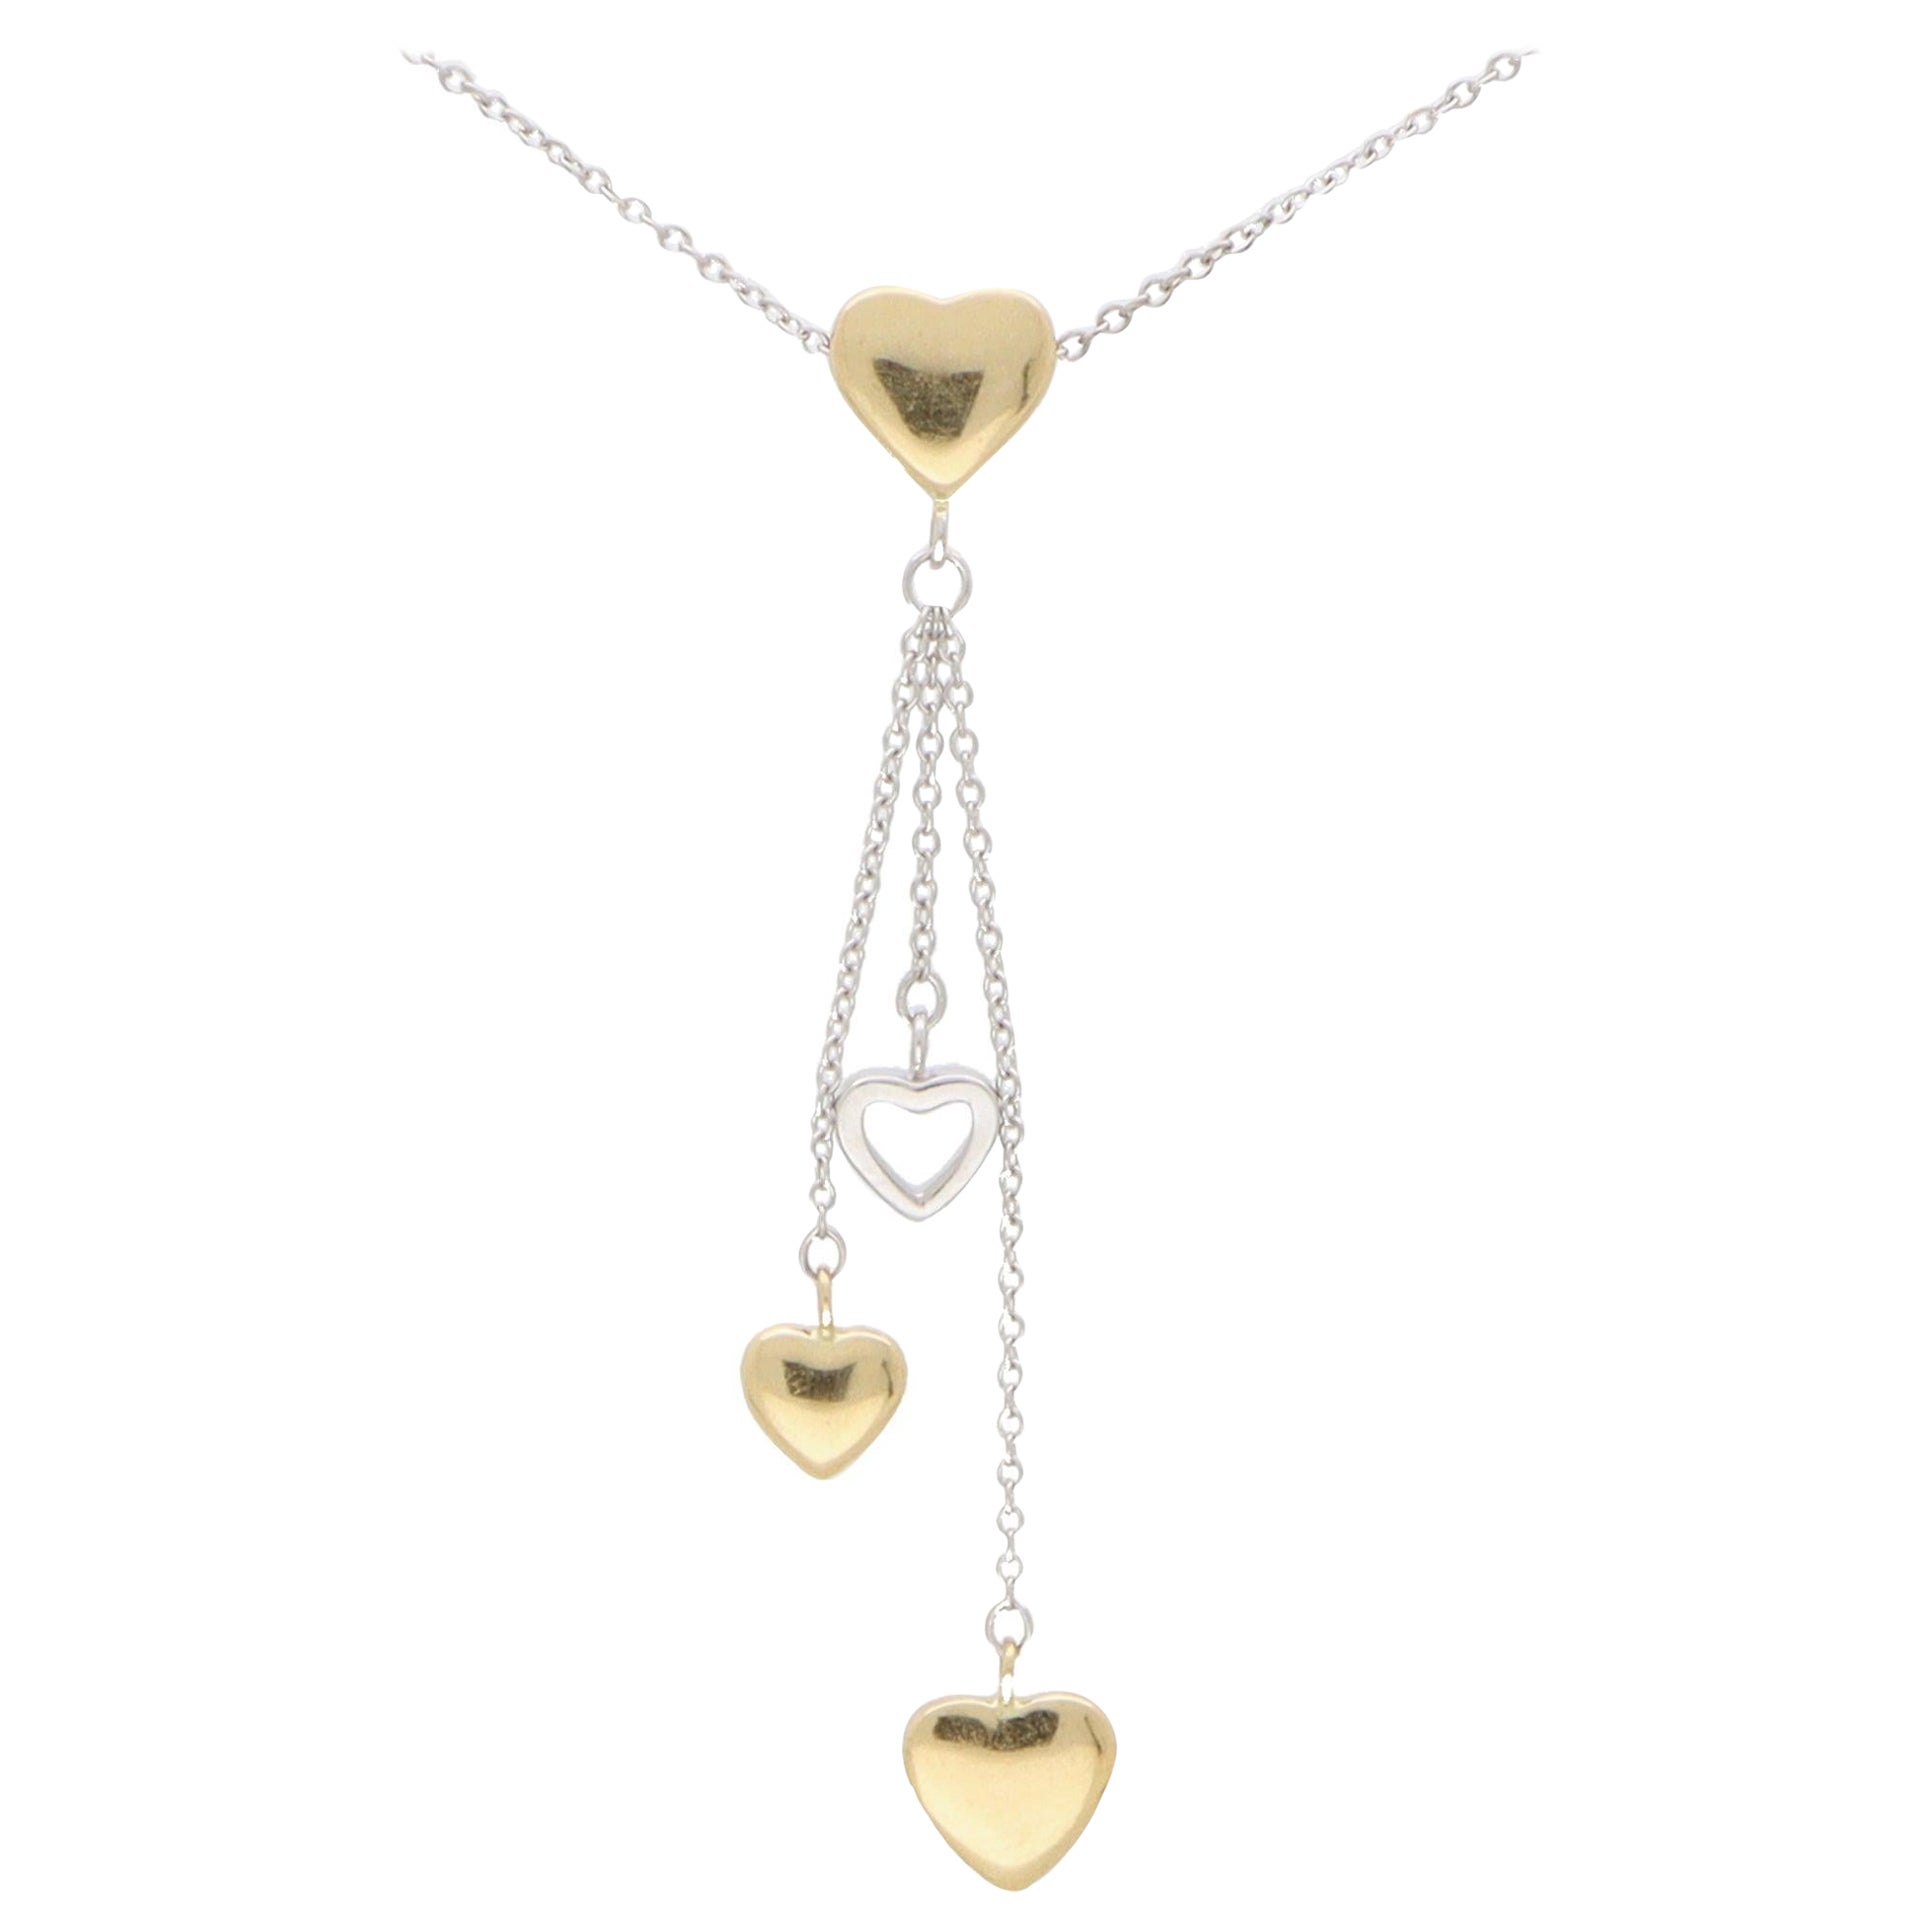 Vintage Tiffany & Co. Heart Drop Necklace Set in 18k Yellow and White Gold